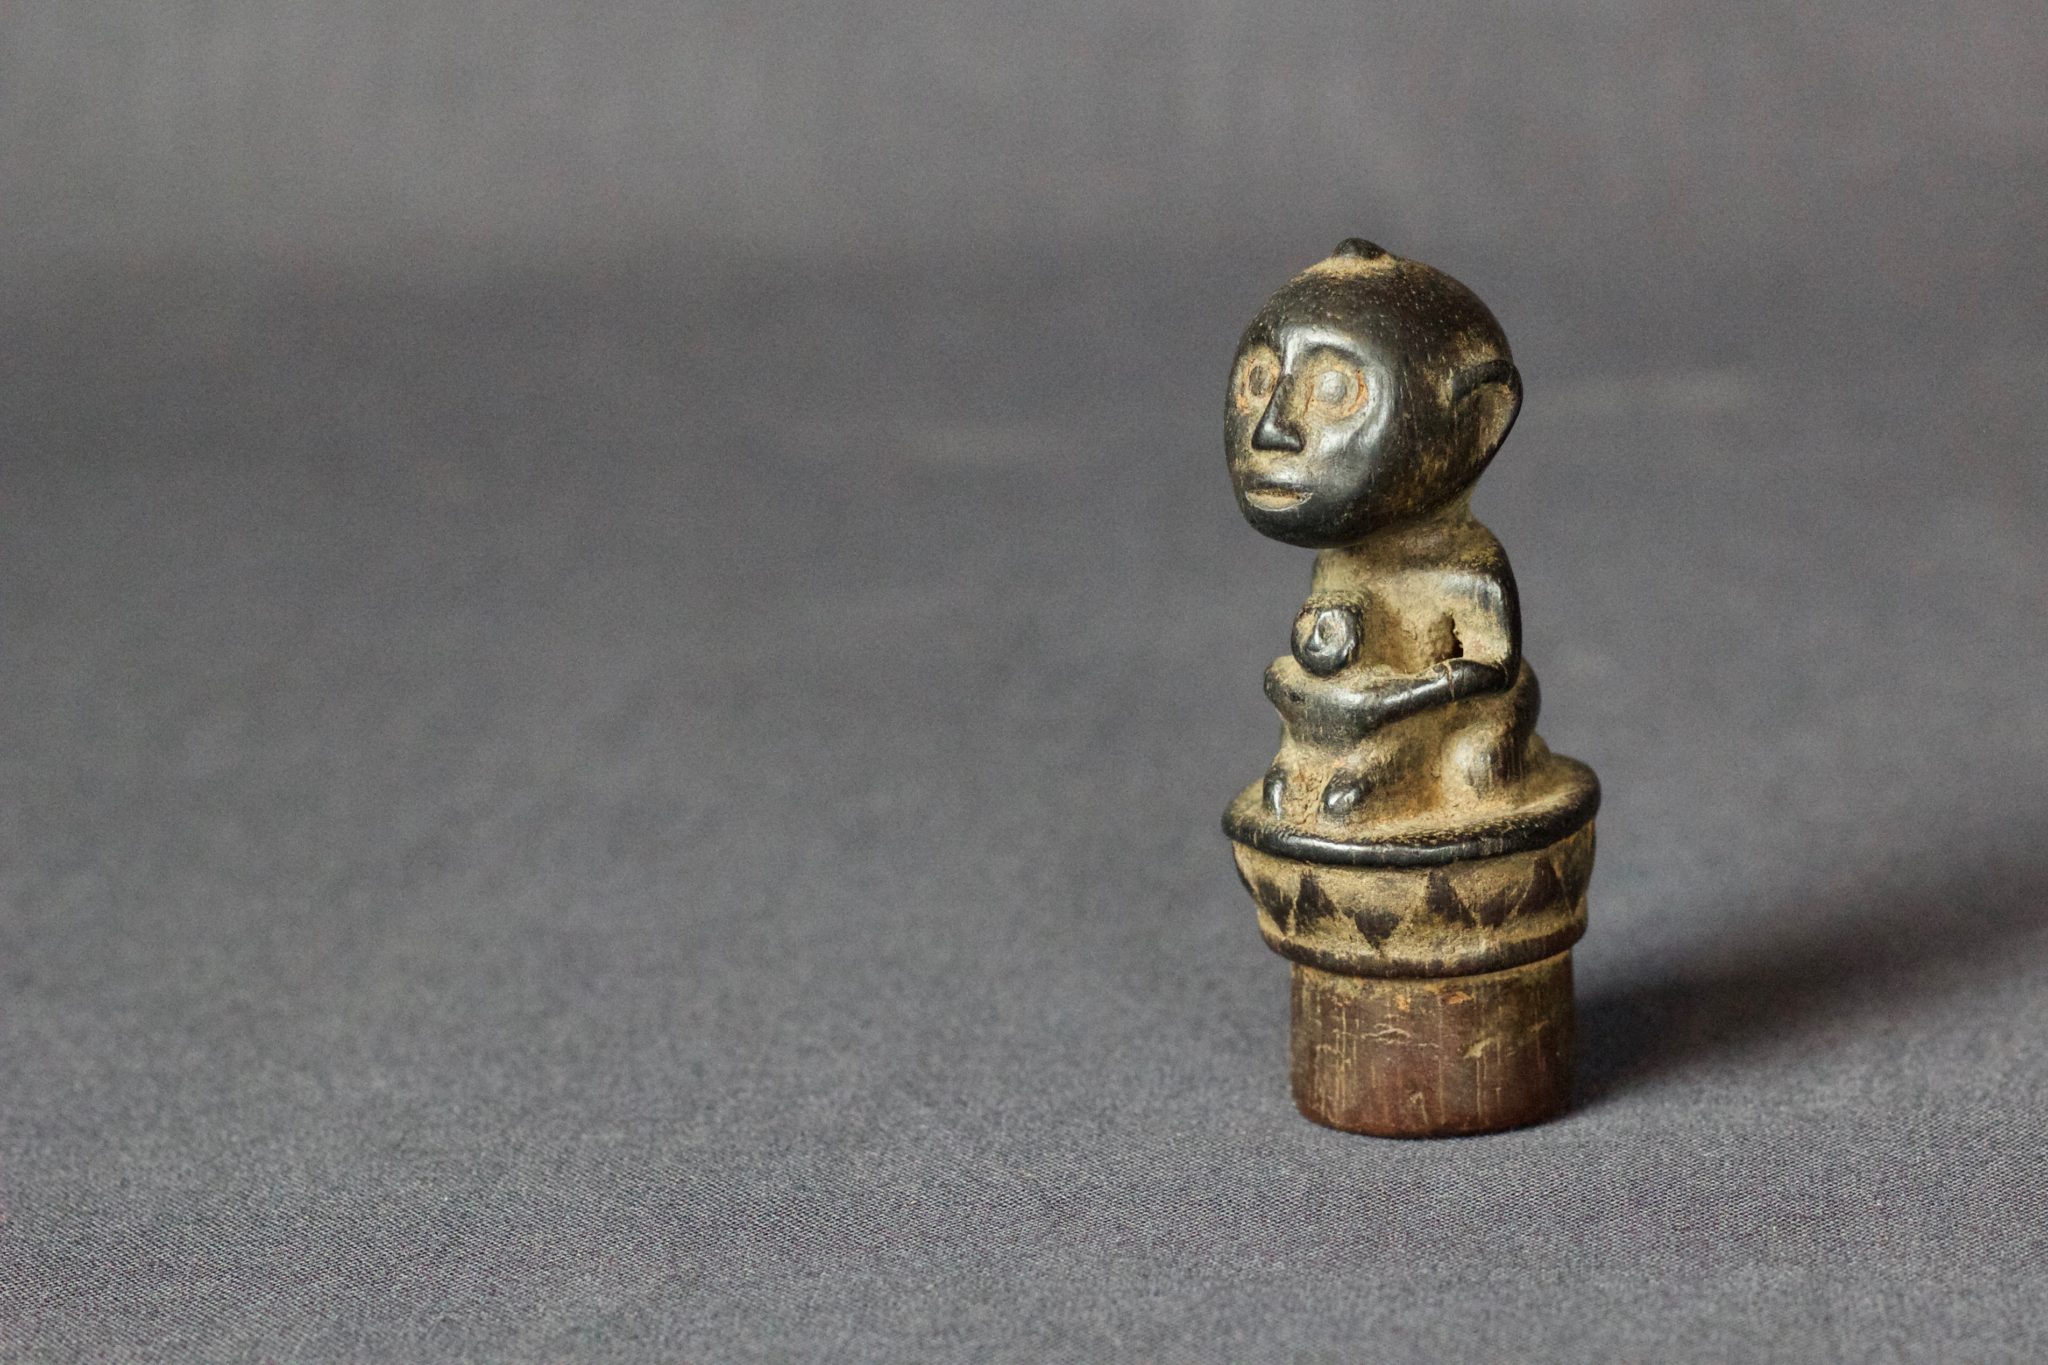 Shaman Magic Medicine Bottle Stopper, East Sumba Island, Lesser Sunda Islands, Indonesia Mid 19th c, Wood, patinated with use and age. Talisman figure with child, used empower the healing medicine in the bottle. 3” x 1 ¼” x 1 ¼”, $80.